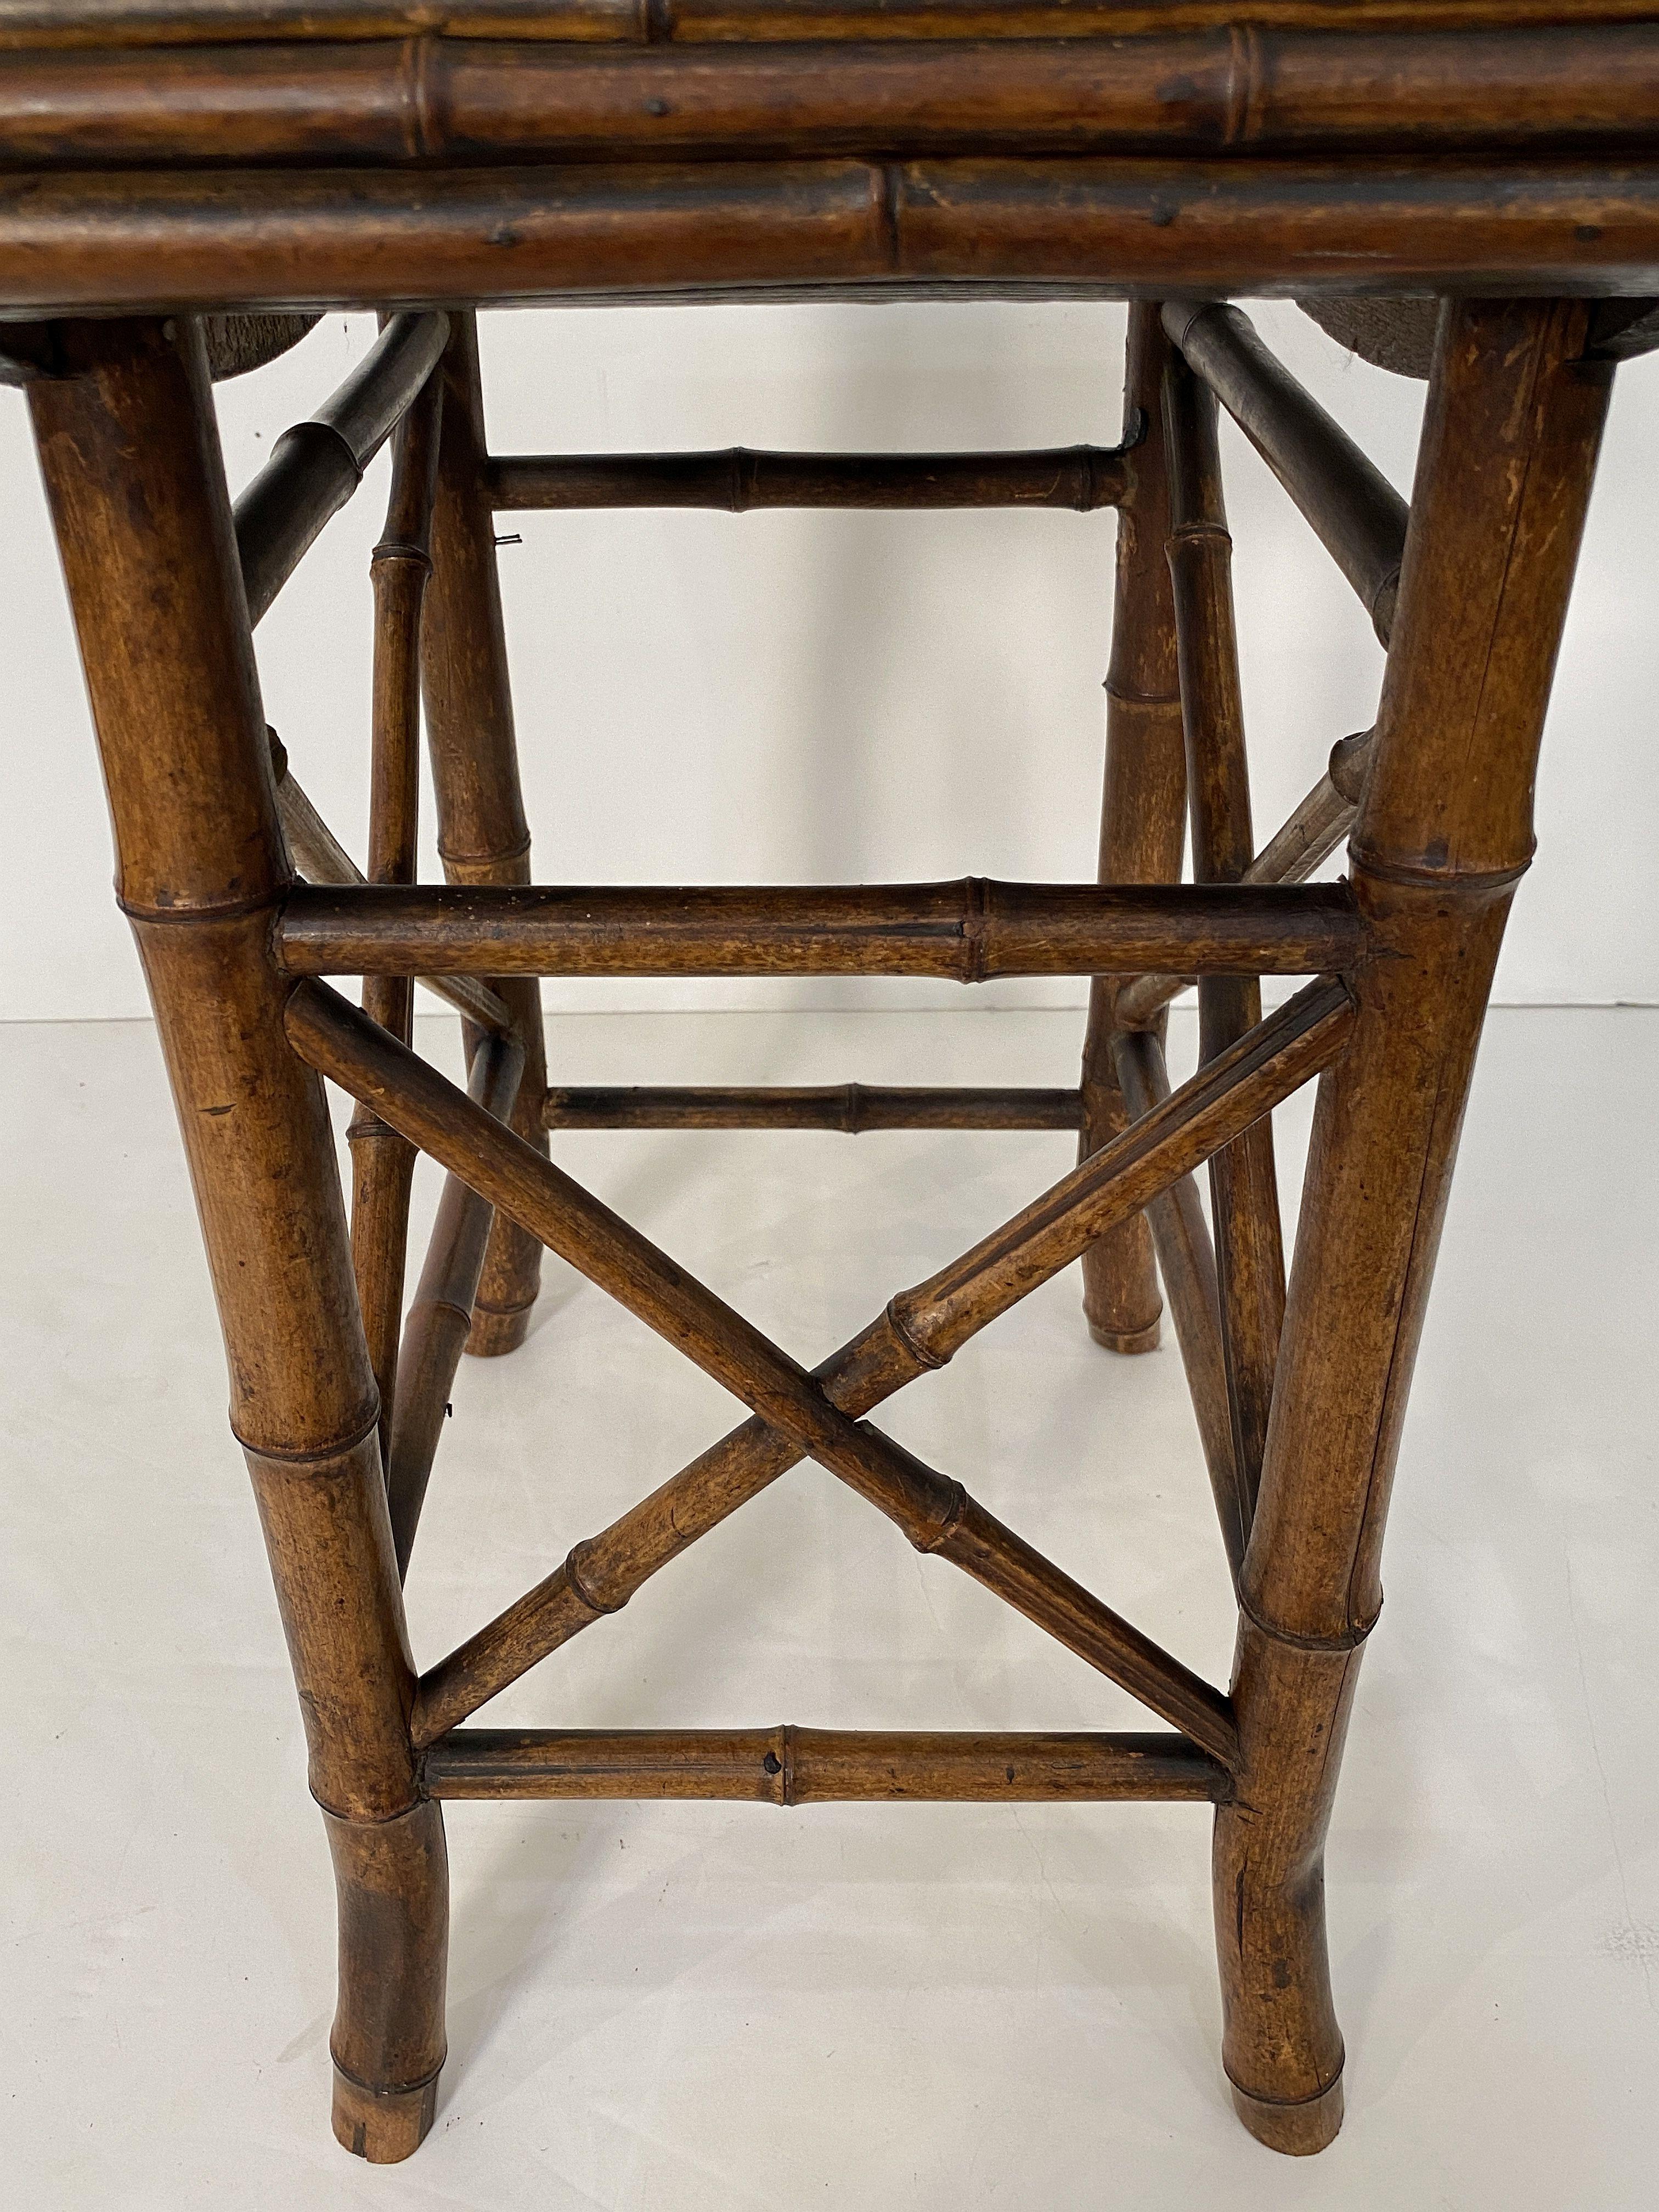 English Bamboo Bench or Stool with Saddle Seat from the Aesthetic Movement Era For Sale 12